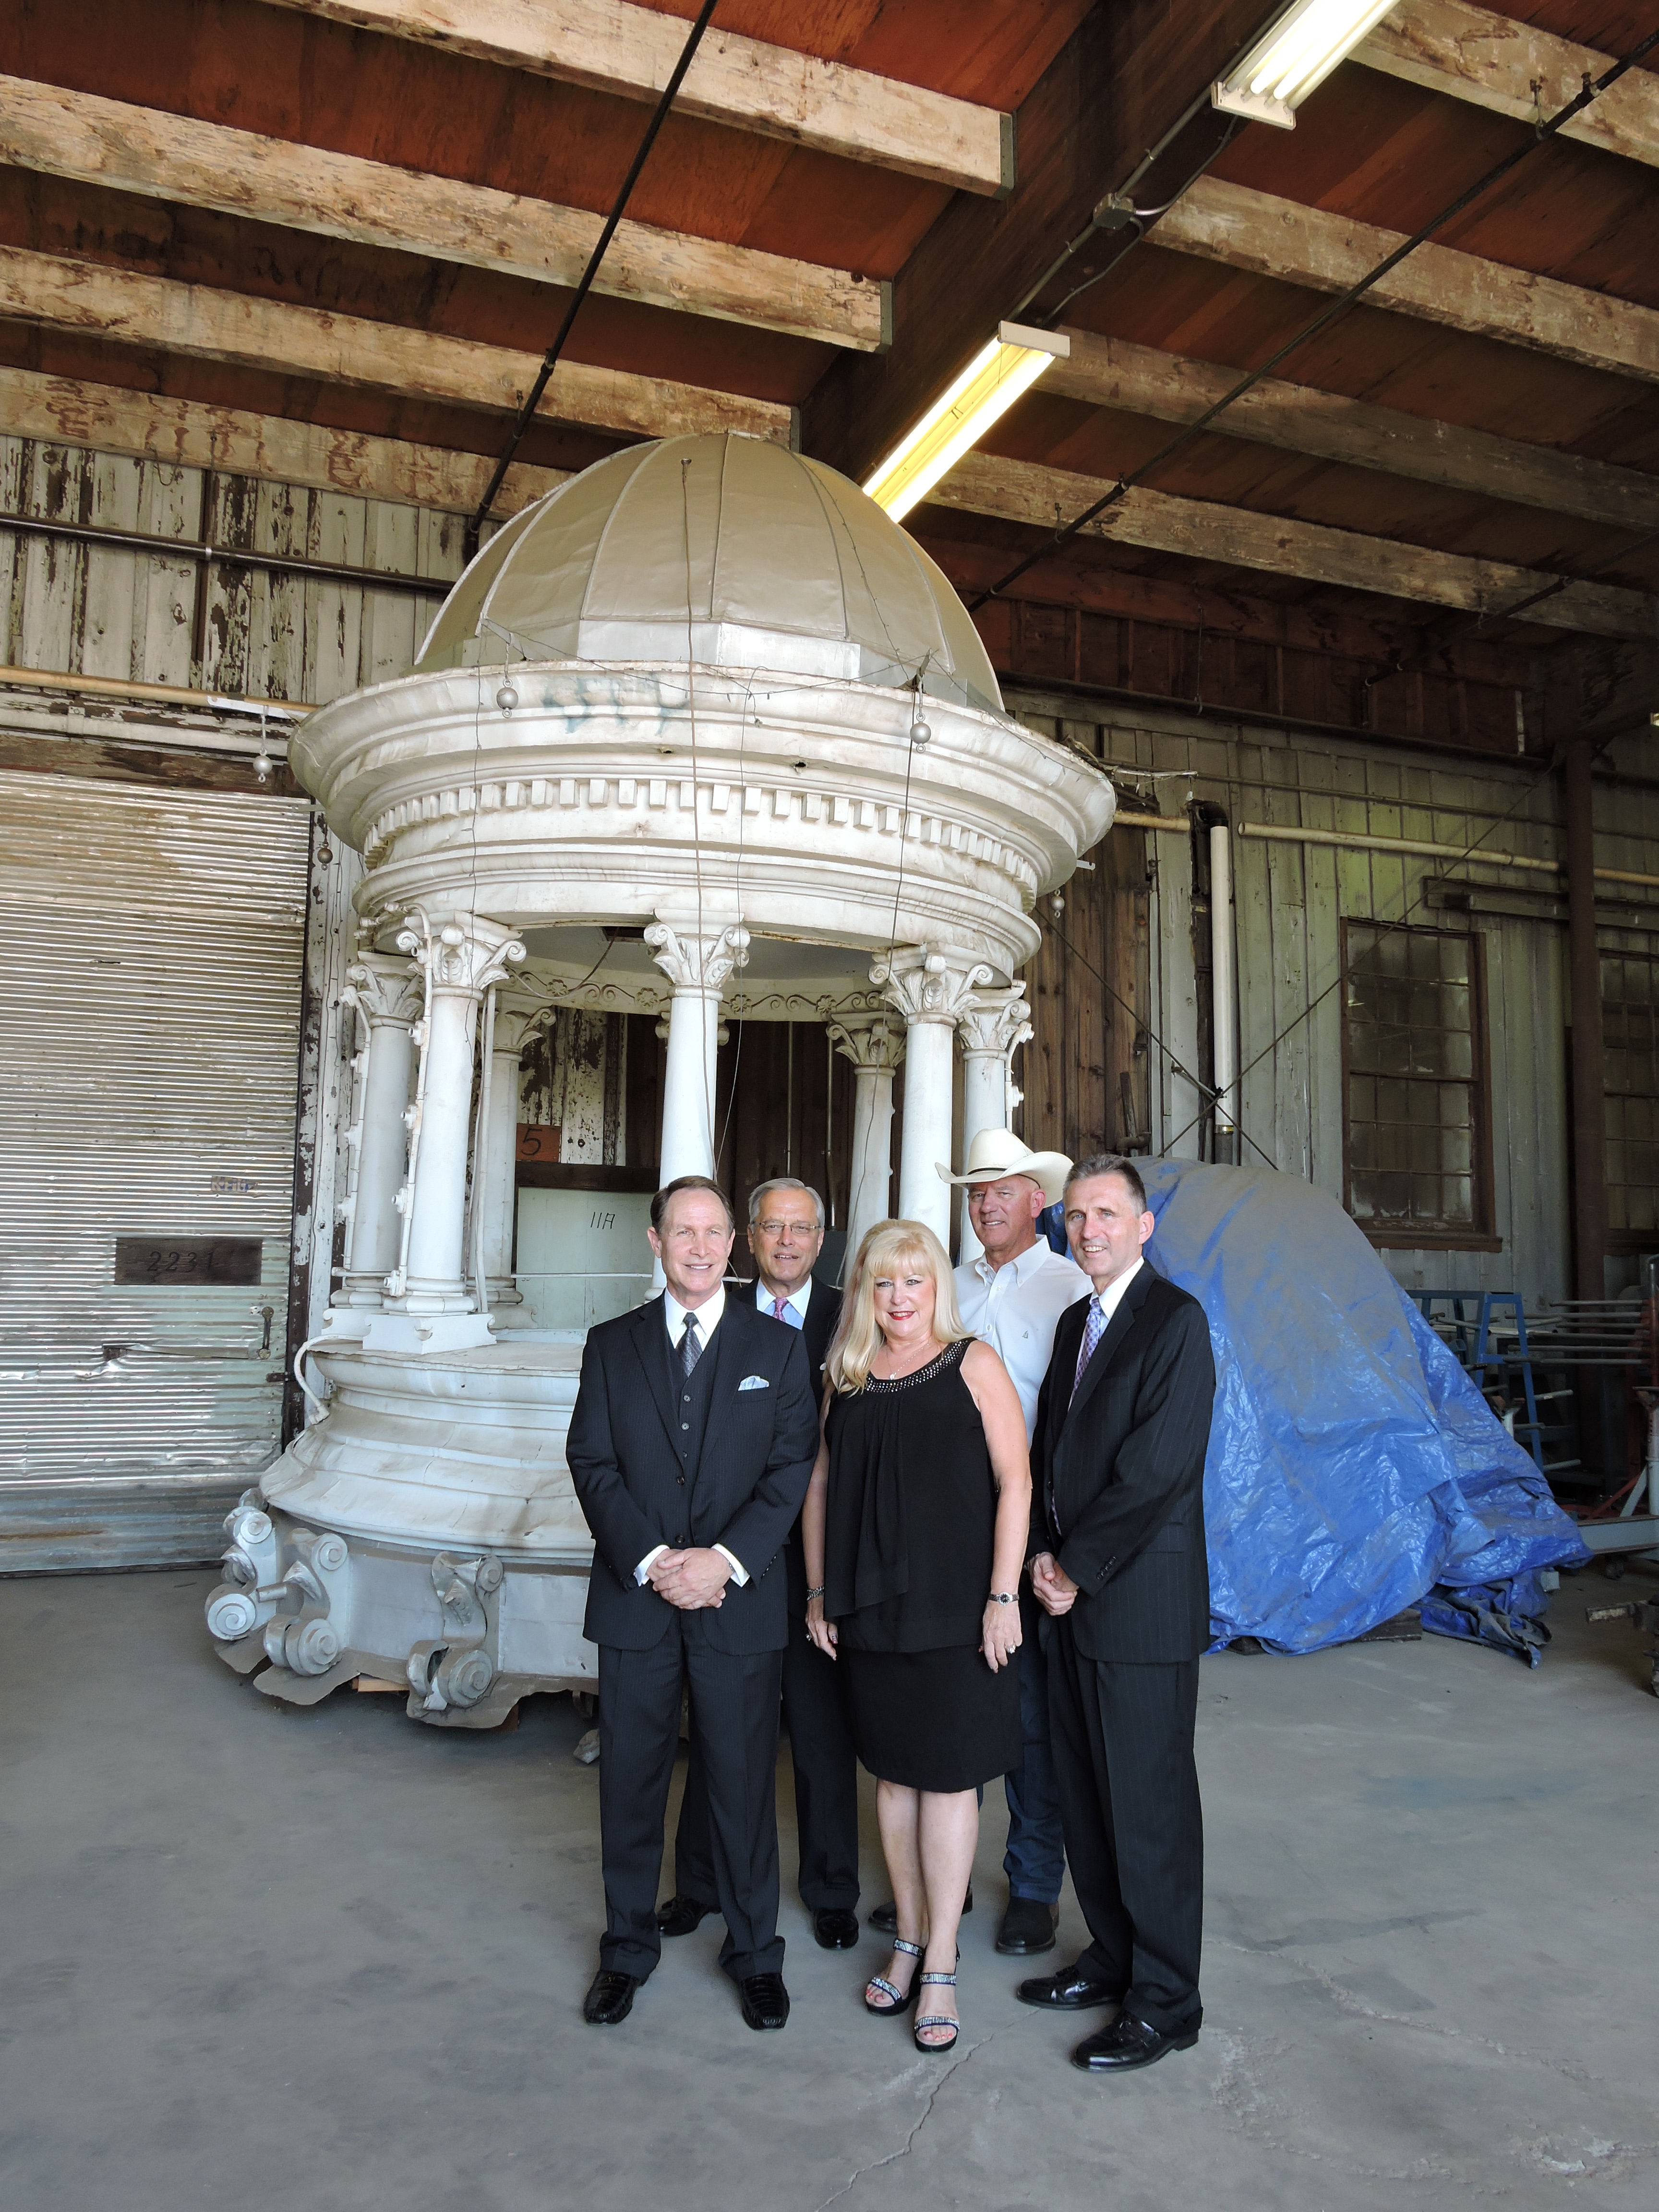 Old Fresno County Courthouse Relic To Get New Home At Fairgrounds